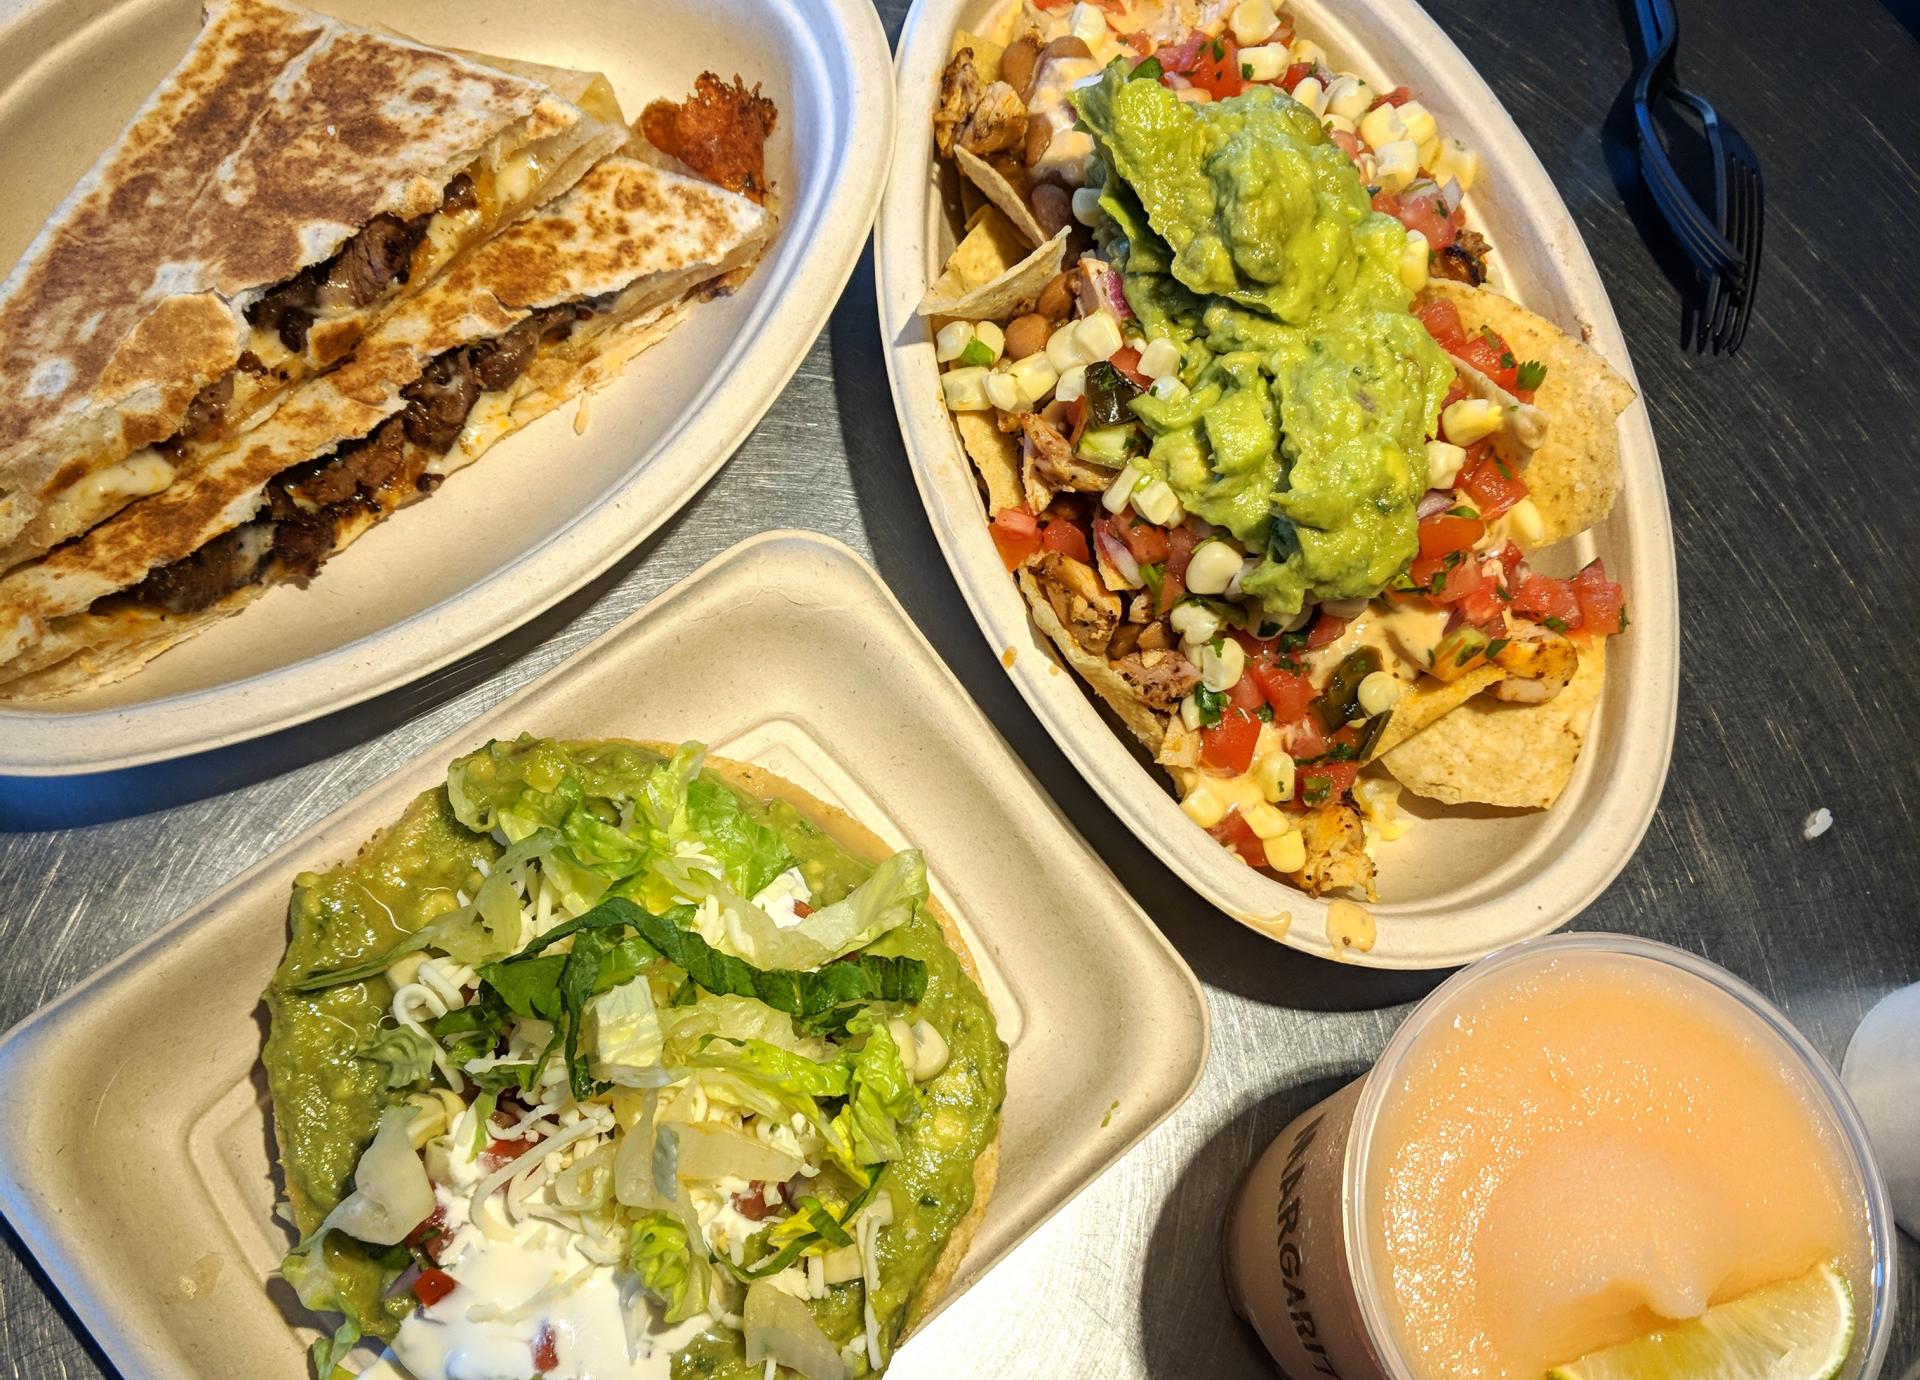 Chipotle Test Kitchen Menu Has Some Fun Stuff Up Its Sleeves